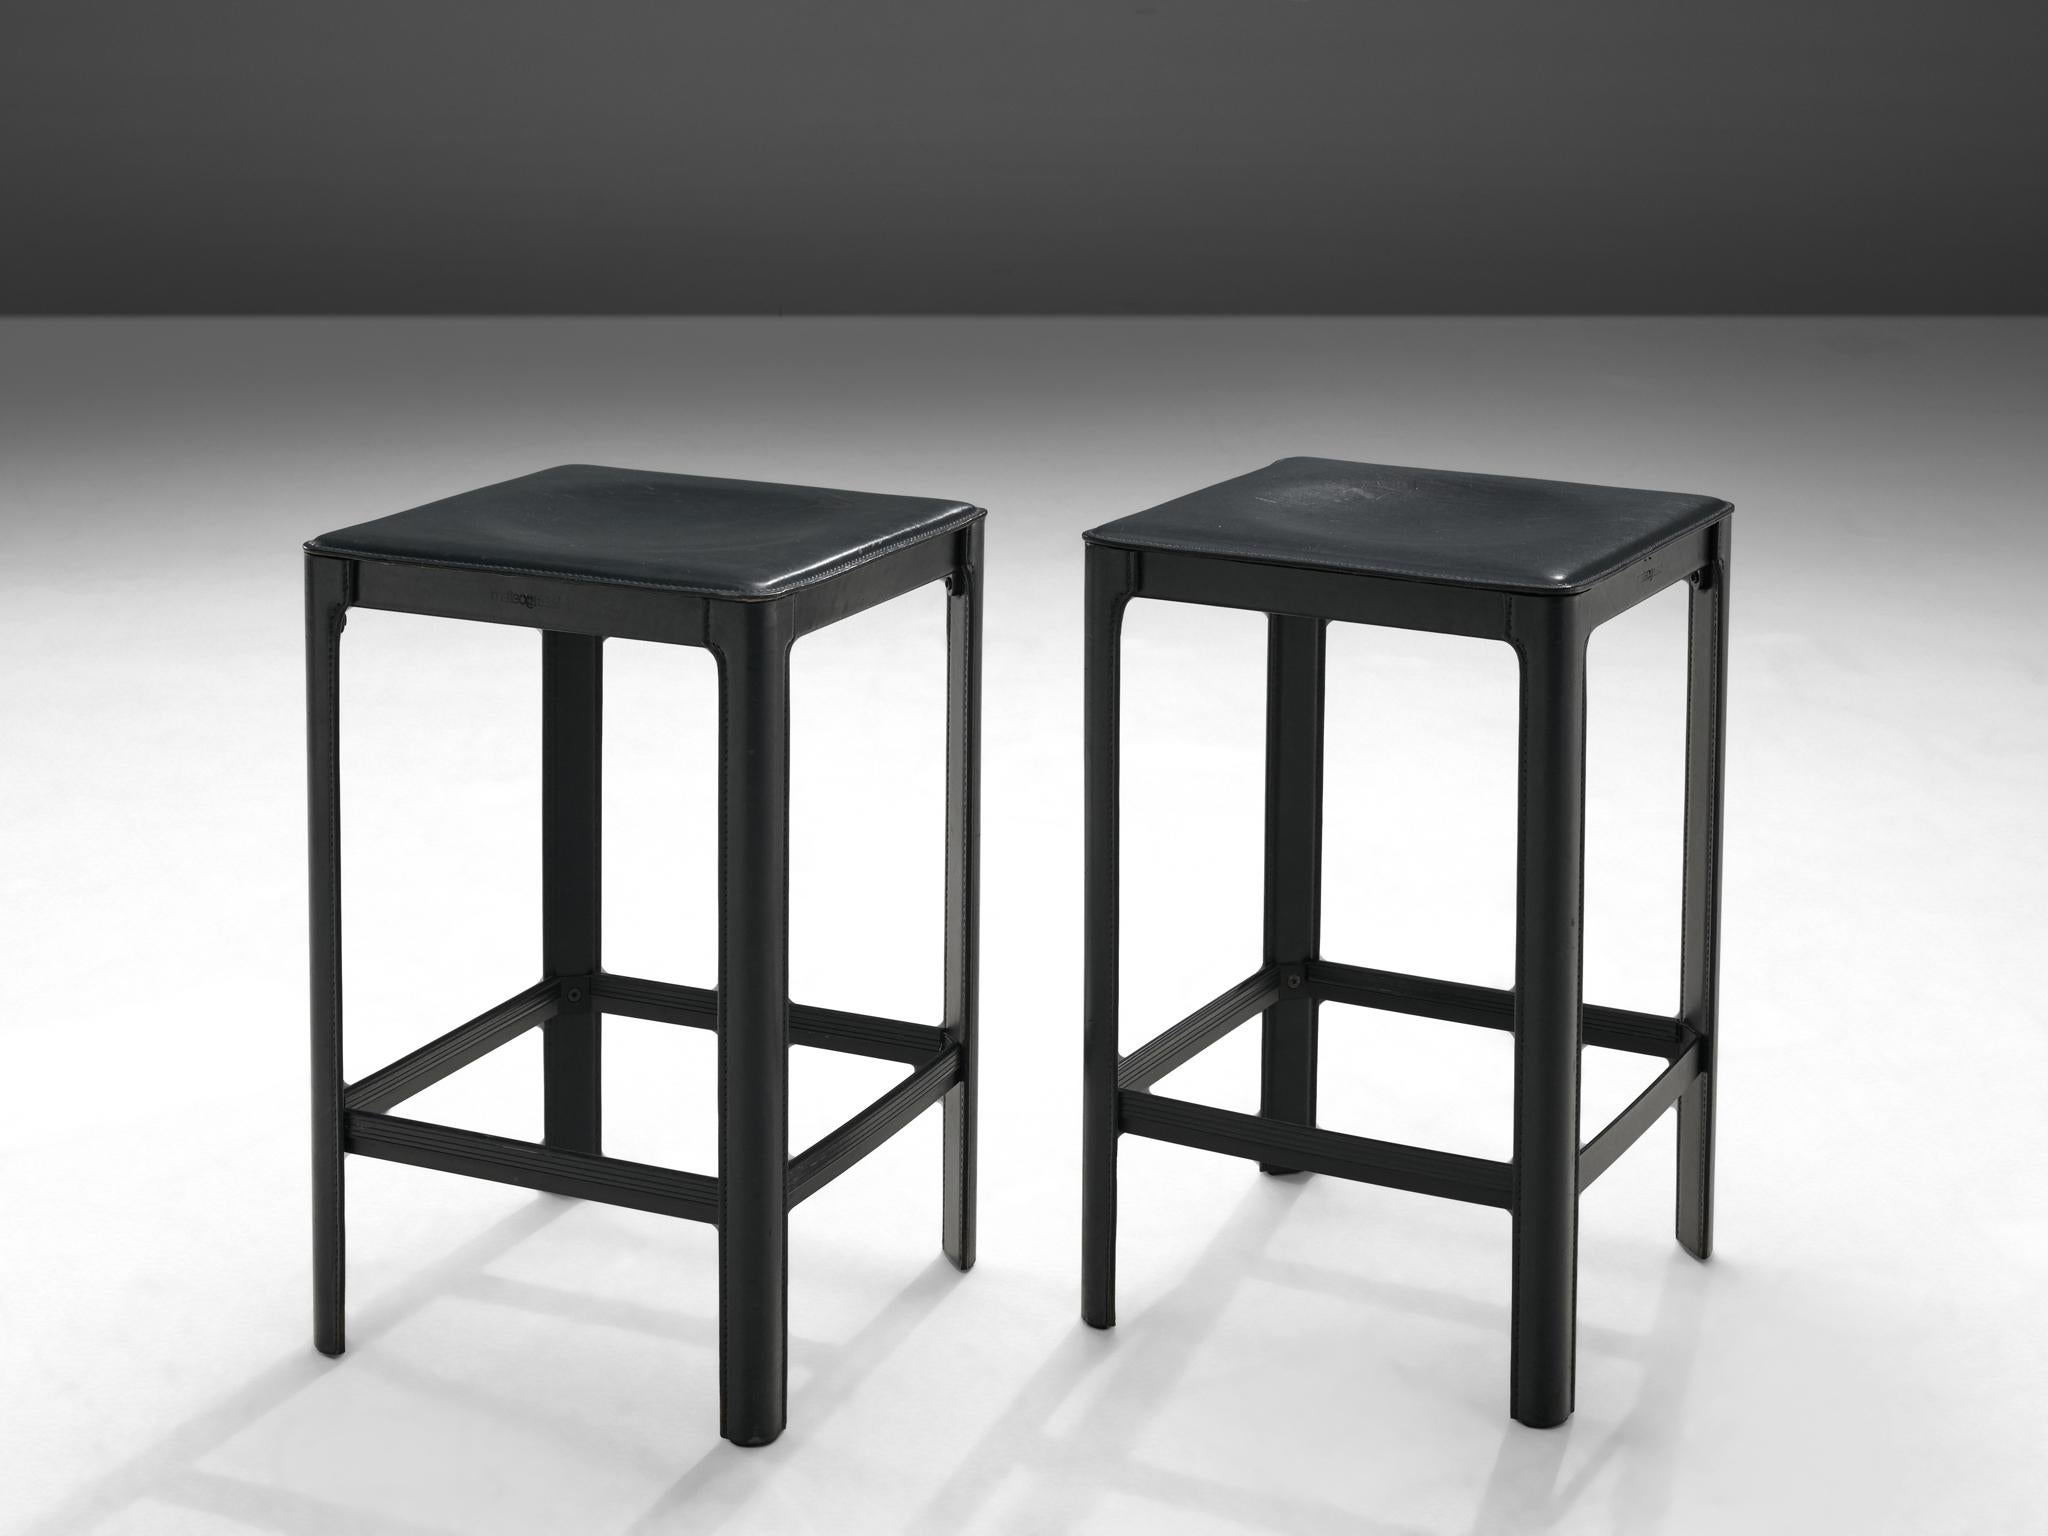 Matteograssi, pair of bar stools, leather, metal, Italy, 1970s

Postmodern set of stools in black leather, designed by Matteo Grassi. The stools are completely covered in leather, which is stitched and molded on to the metal frame, a type of